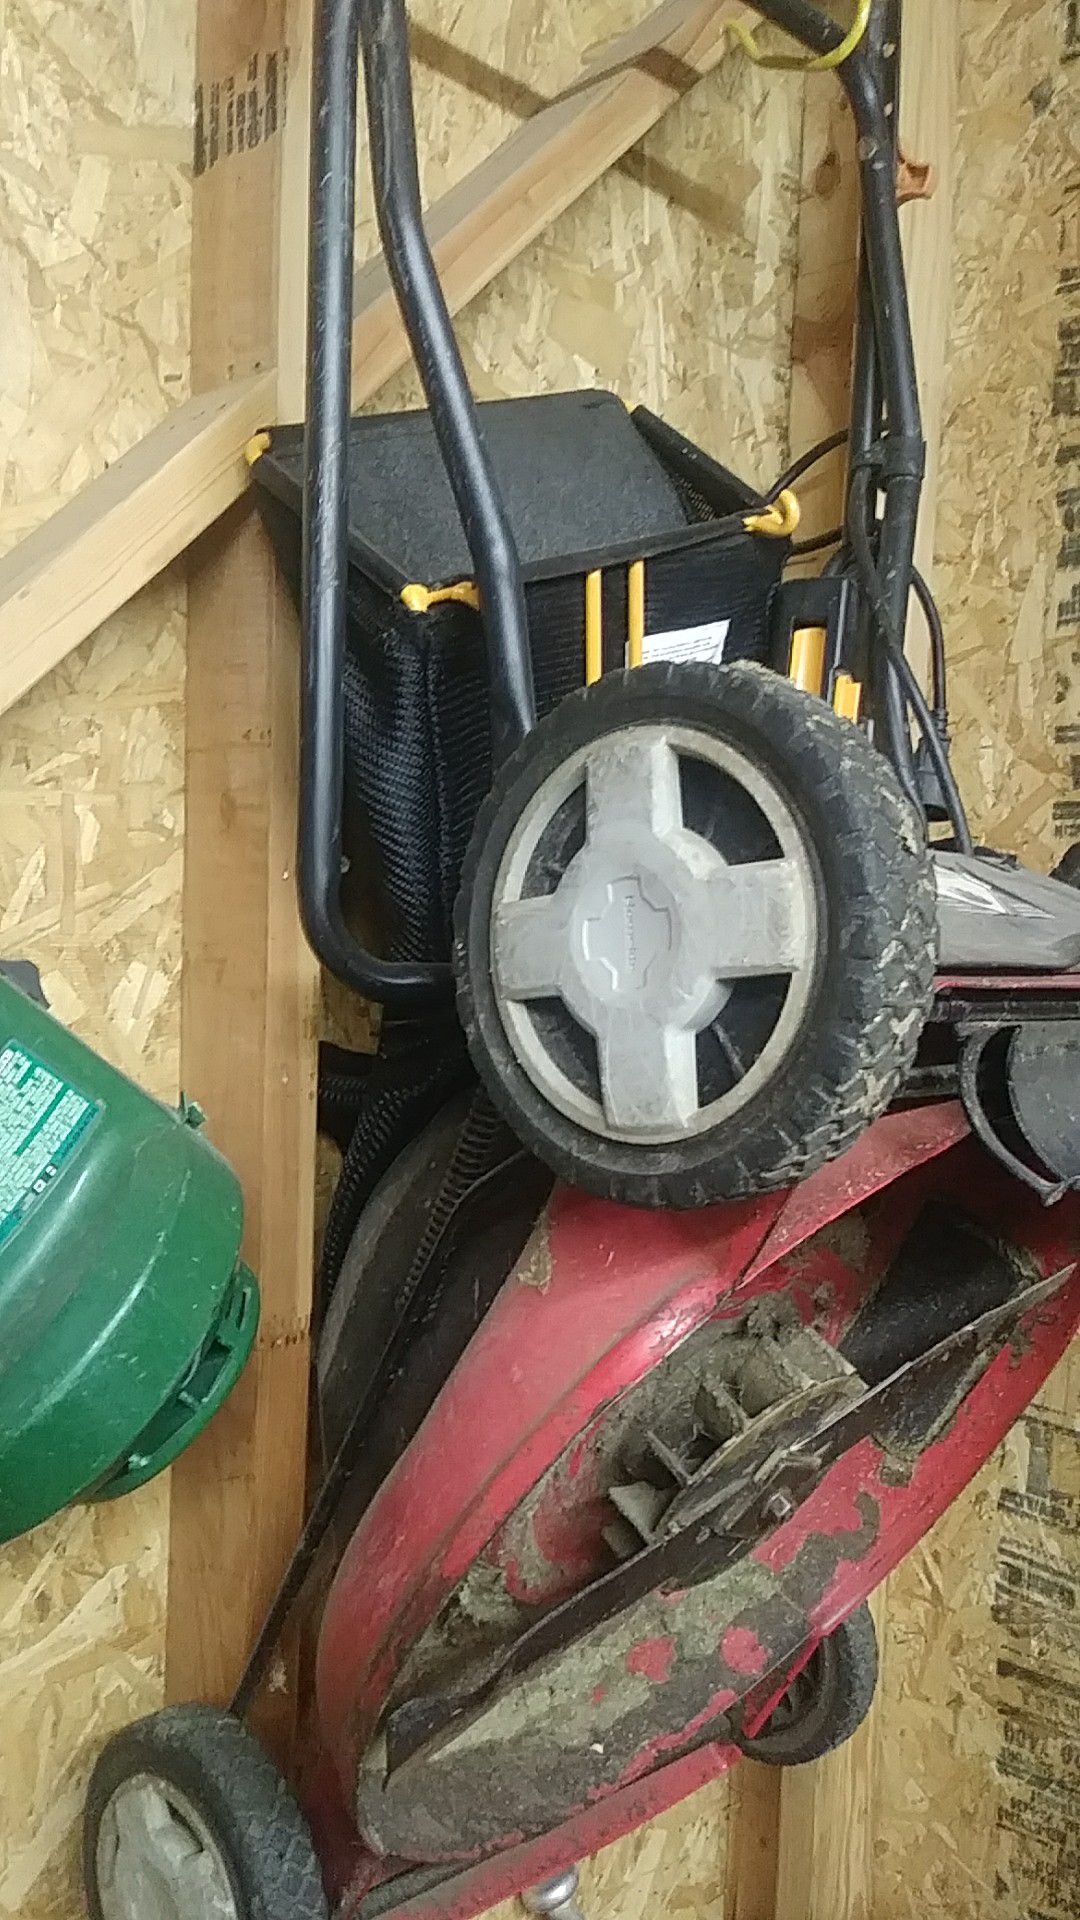 Electric lawn mower with bag